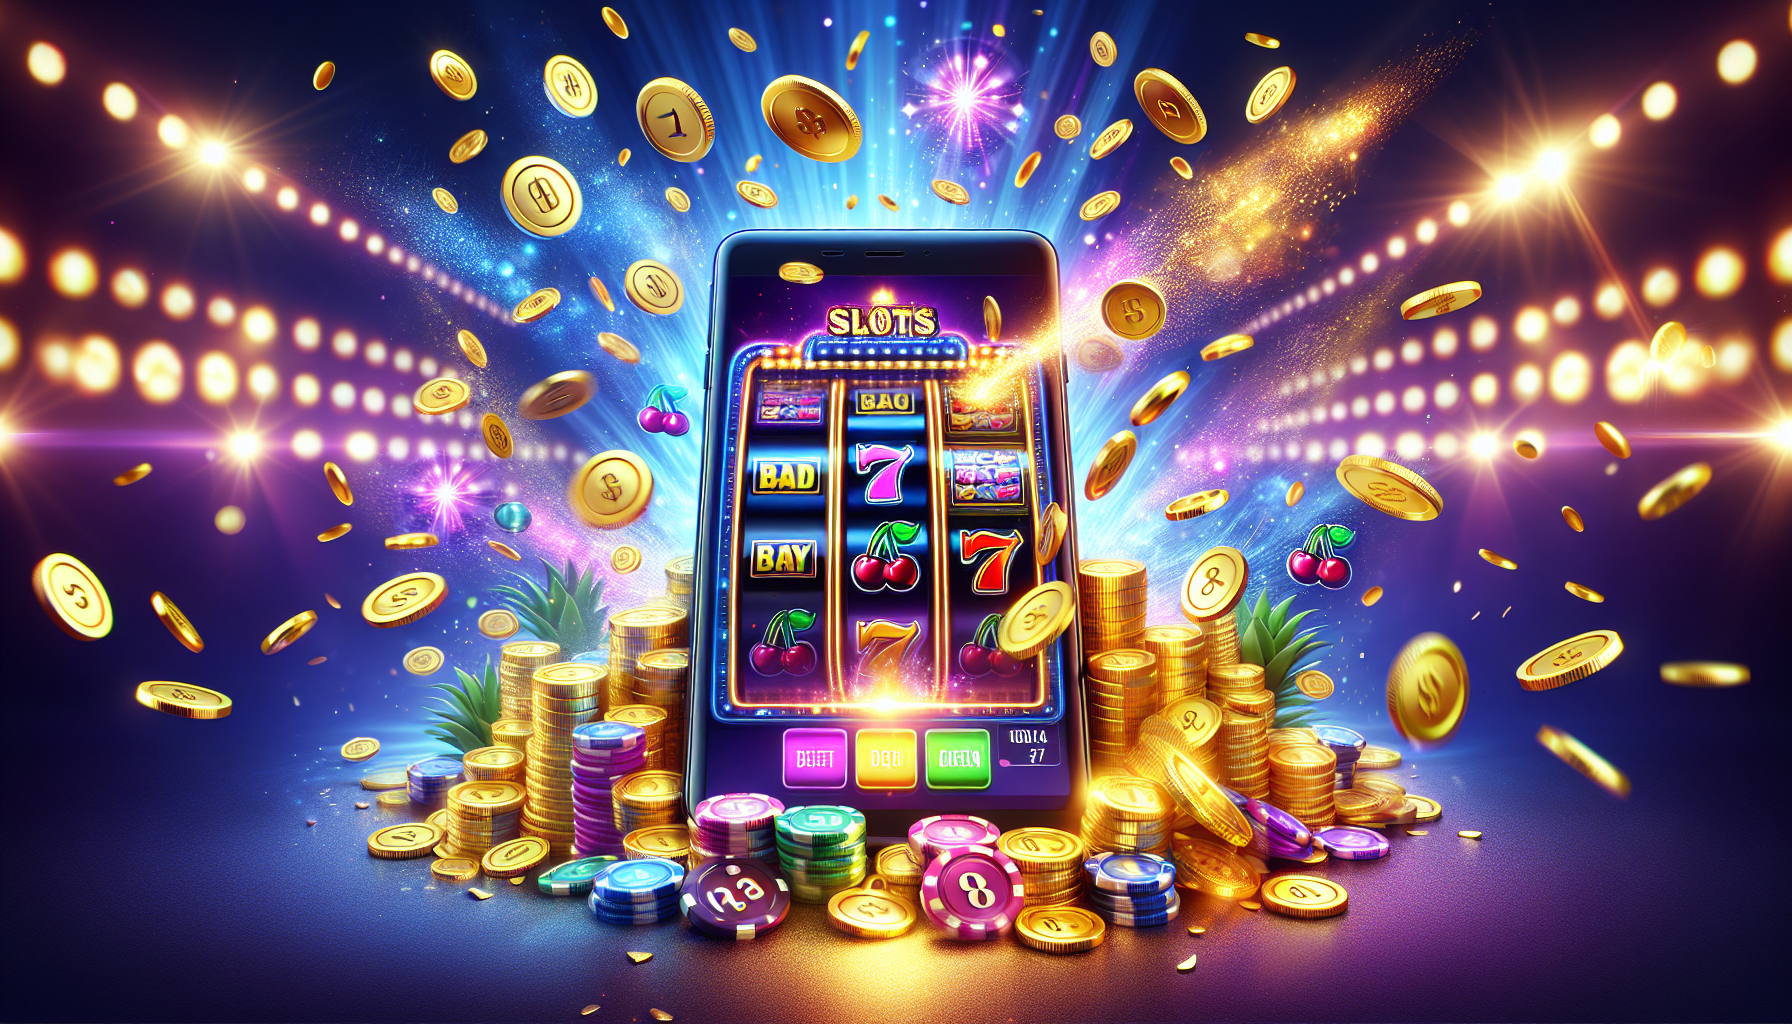 Can You Win Money On Mobile Slots?